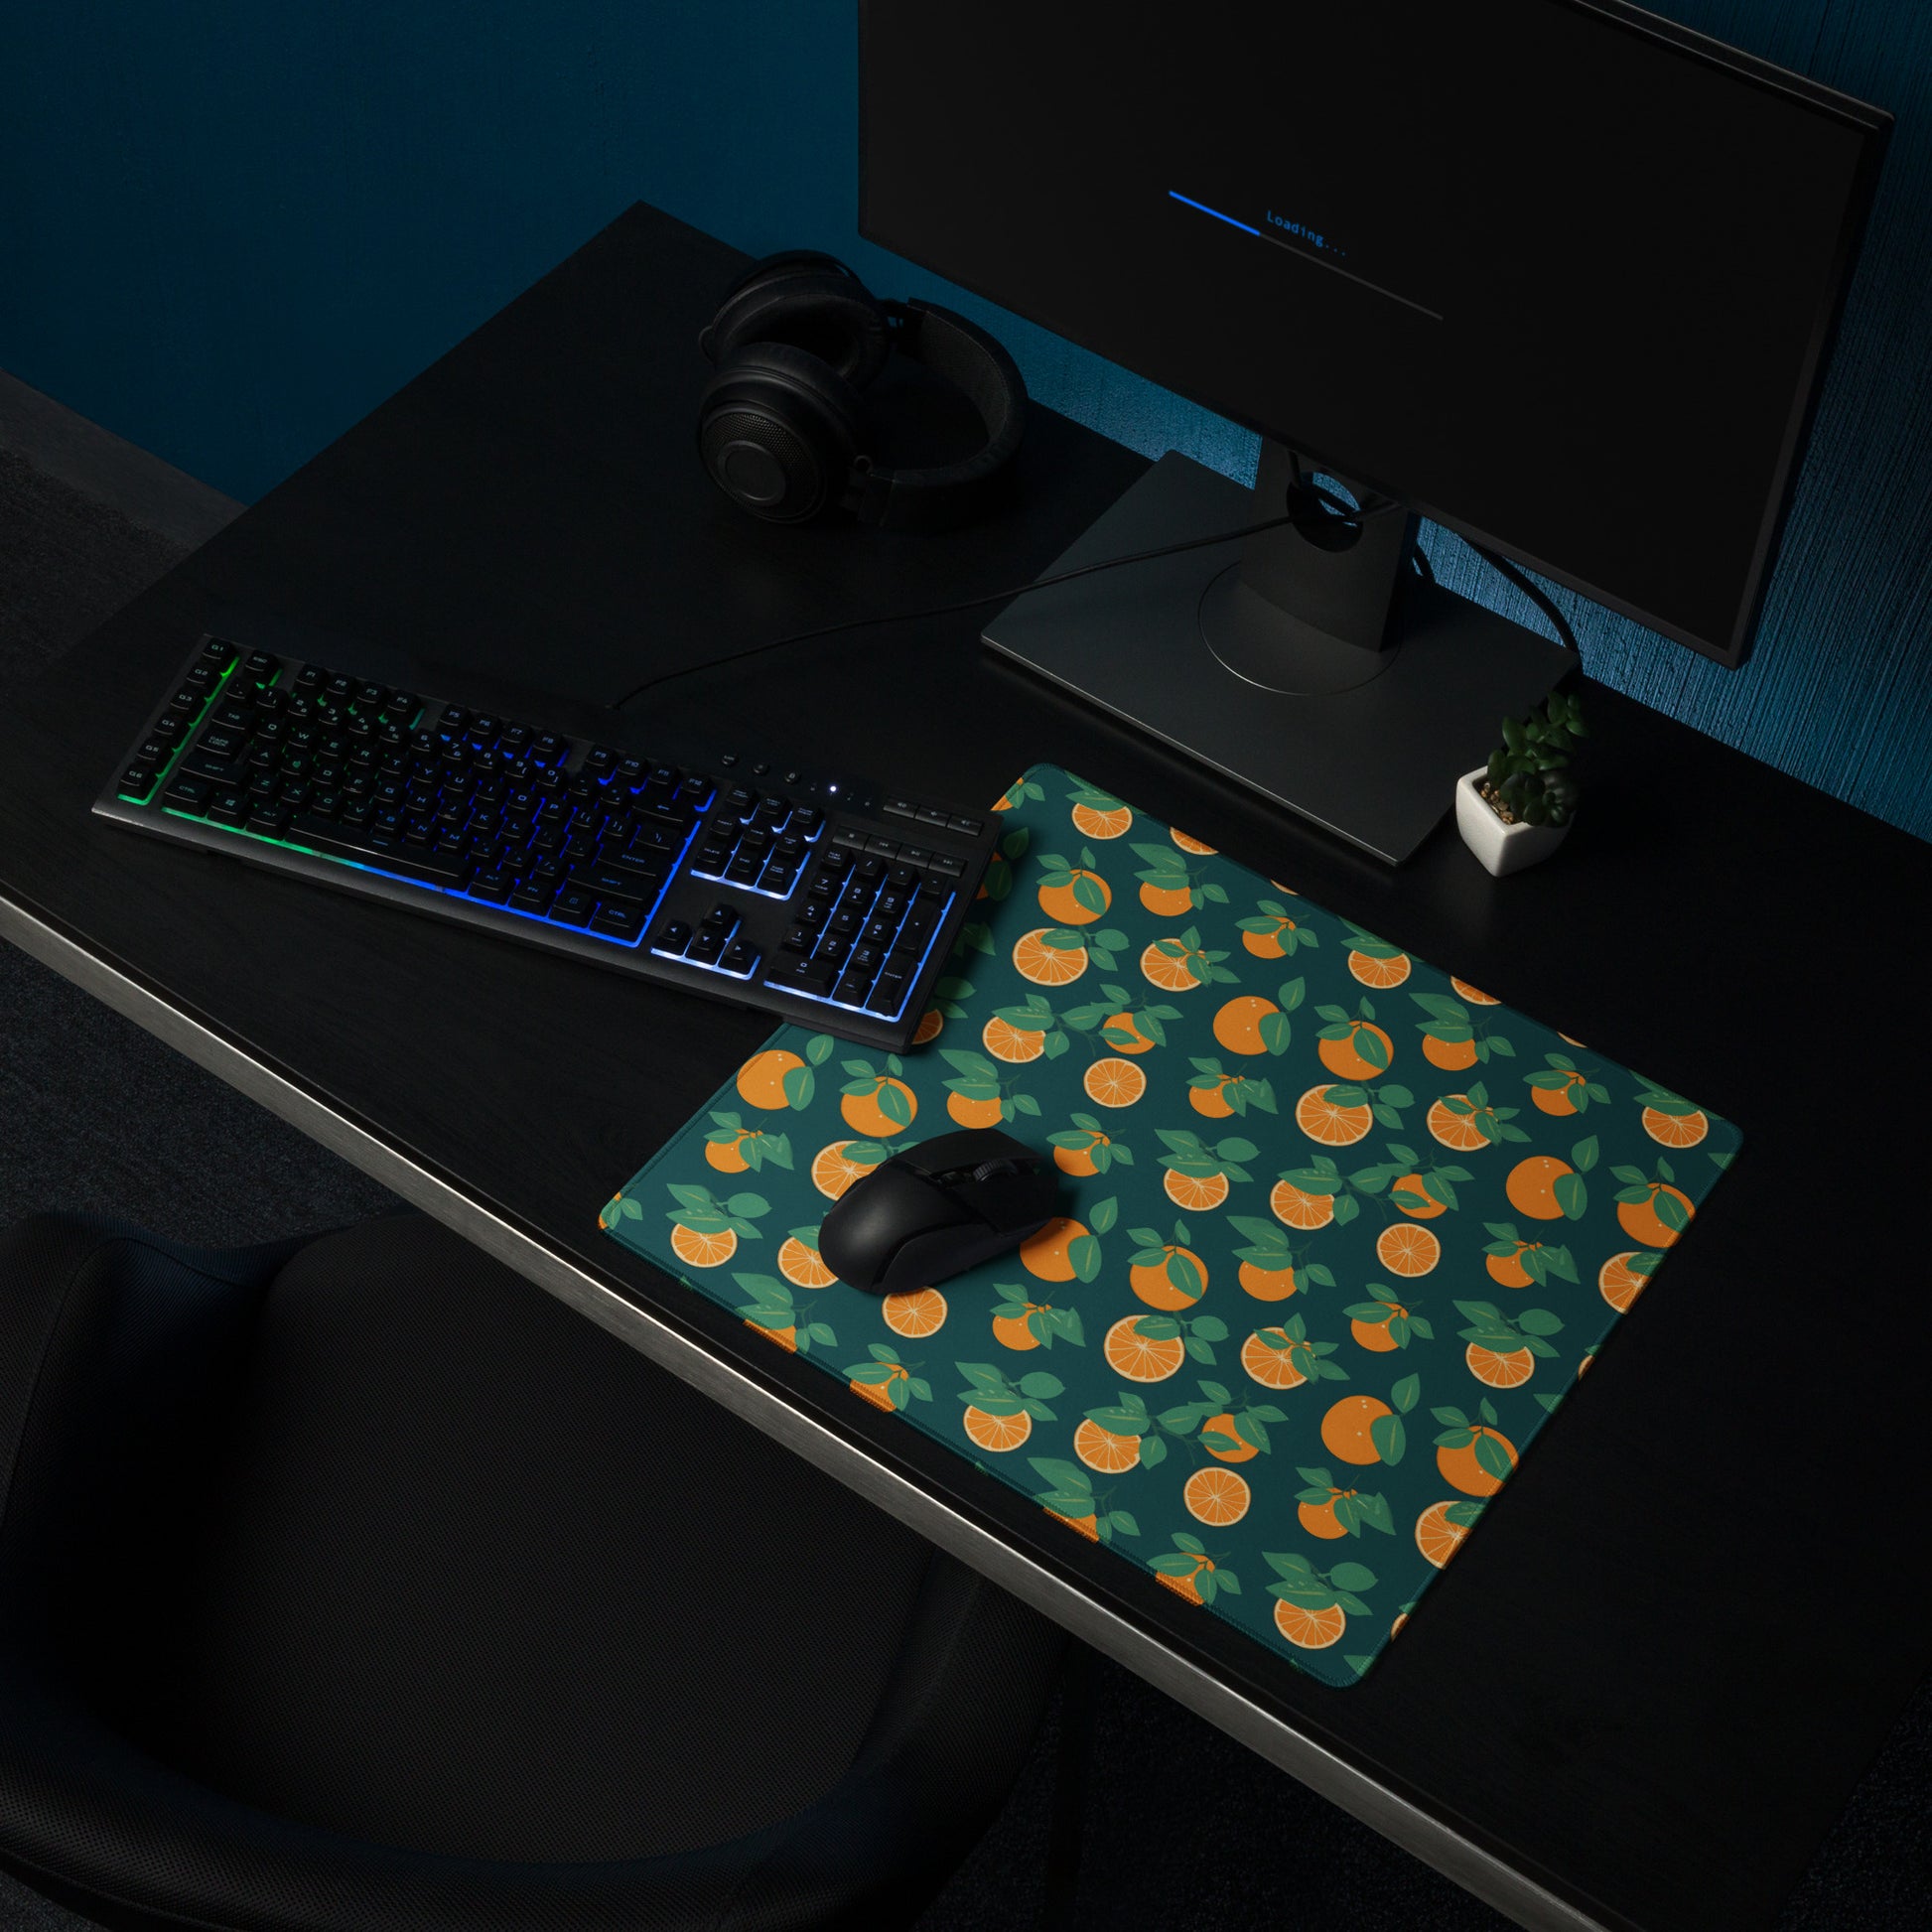 A 18" x 16" desk pad with oranges all over it shown on a desk setup. Orange and Blue in color.